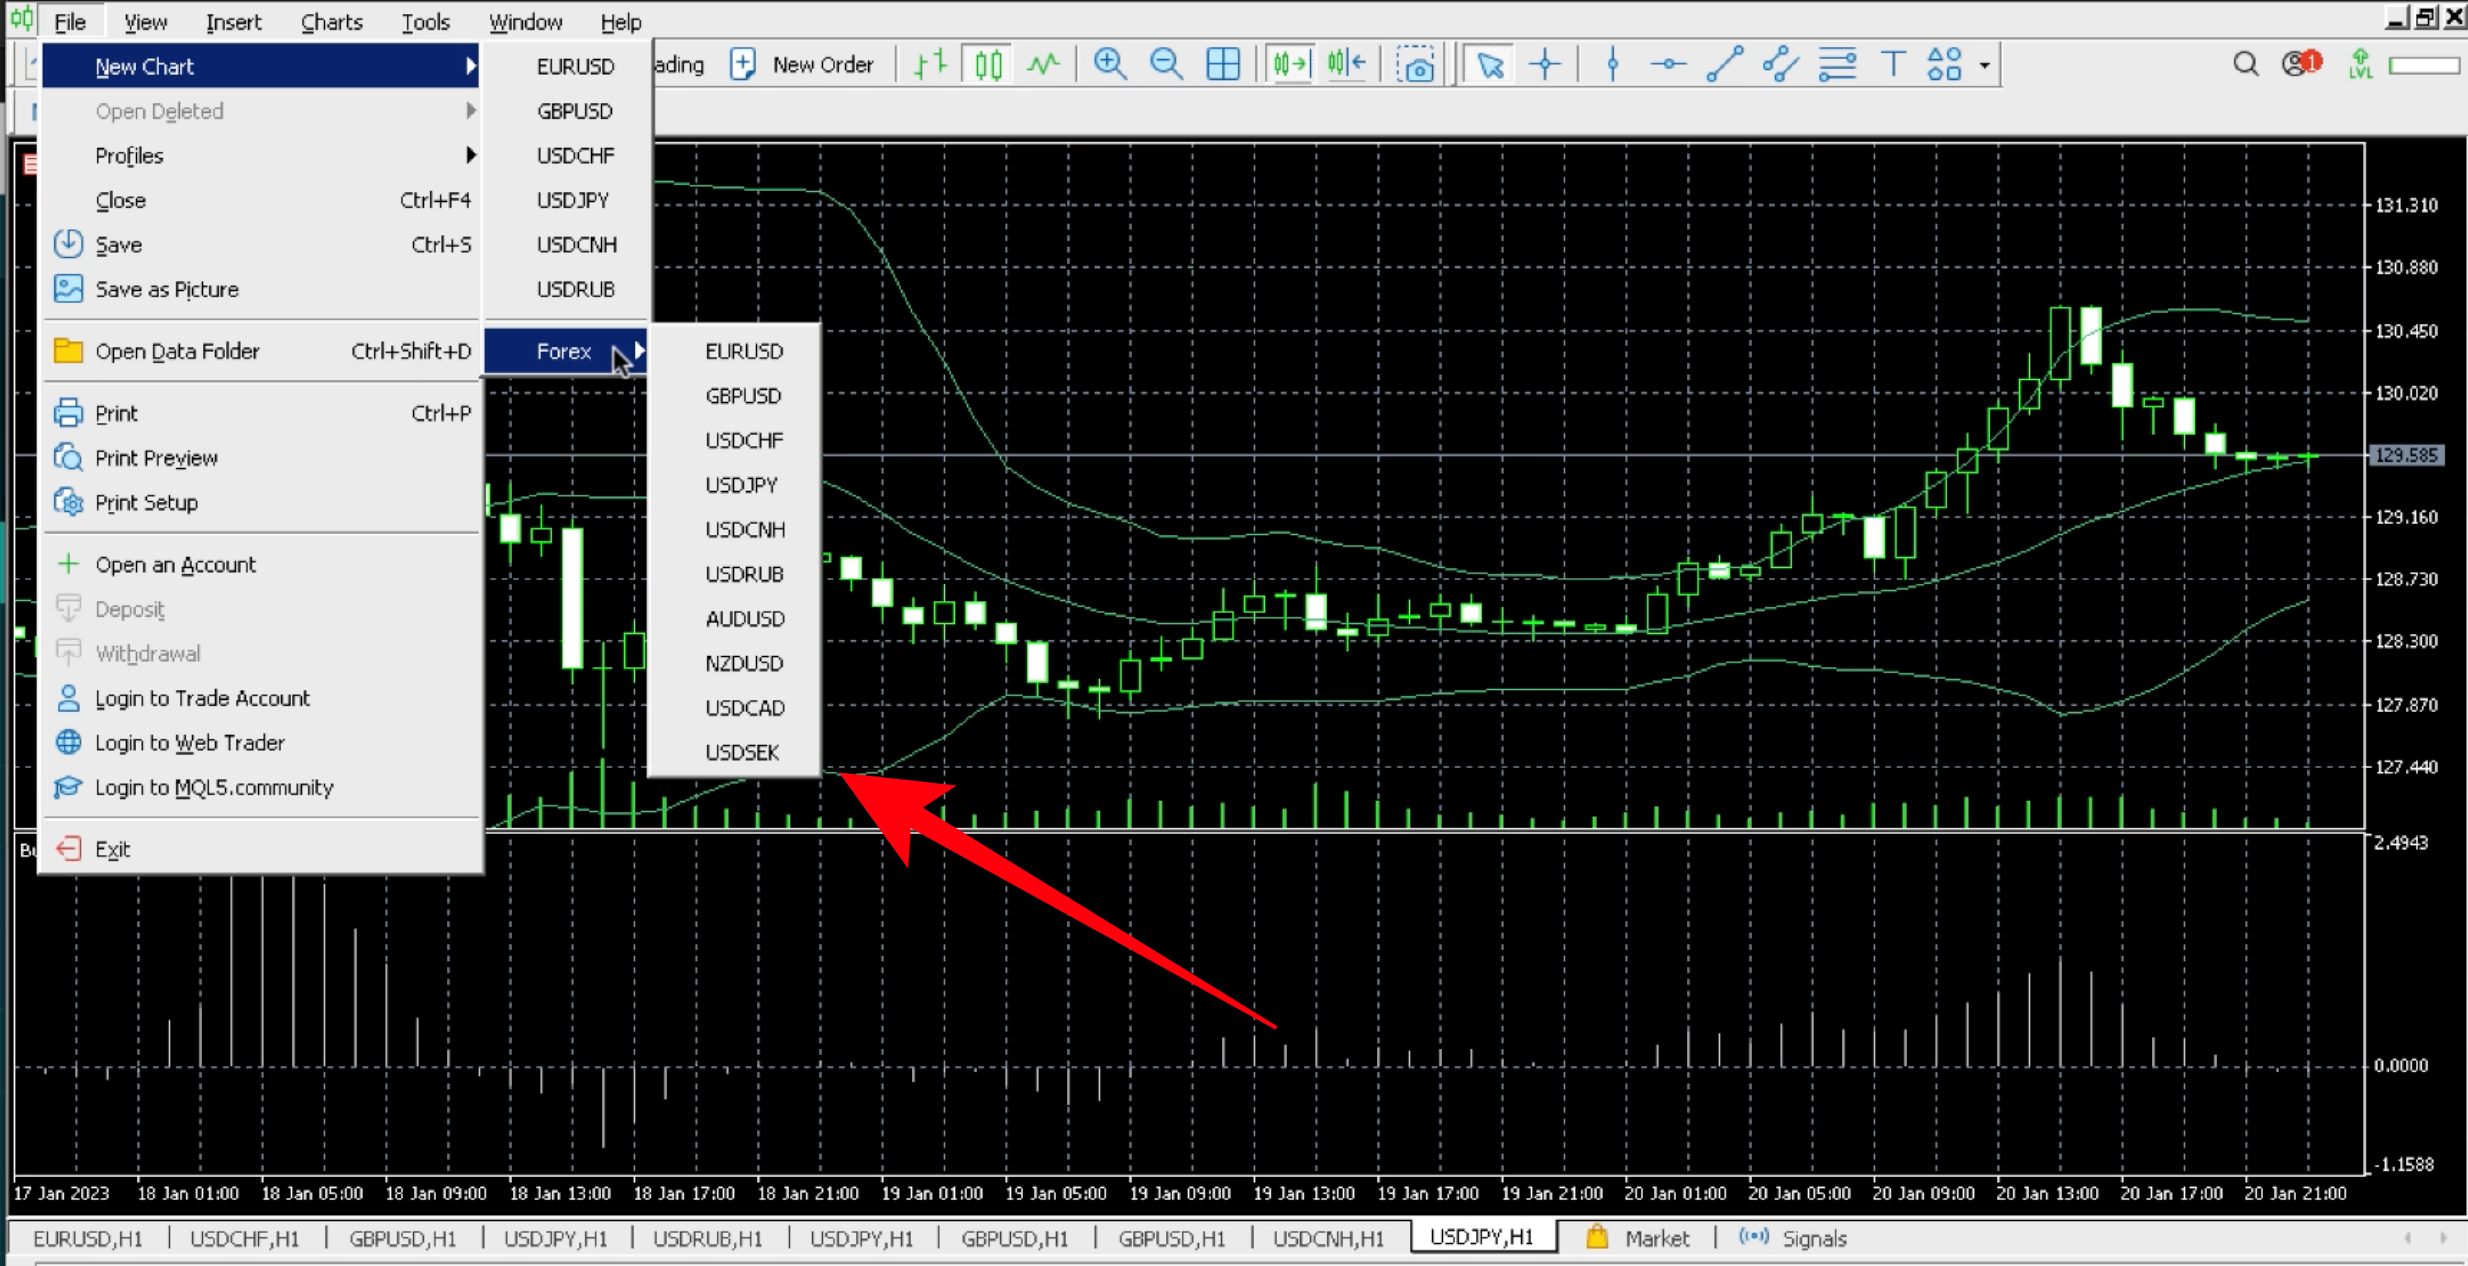 How to select tradable assets on the MetaTrader 5